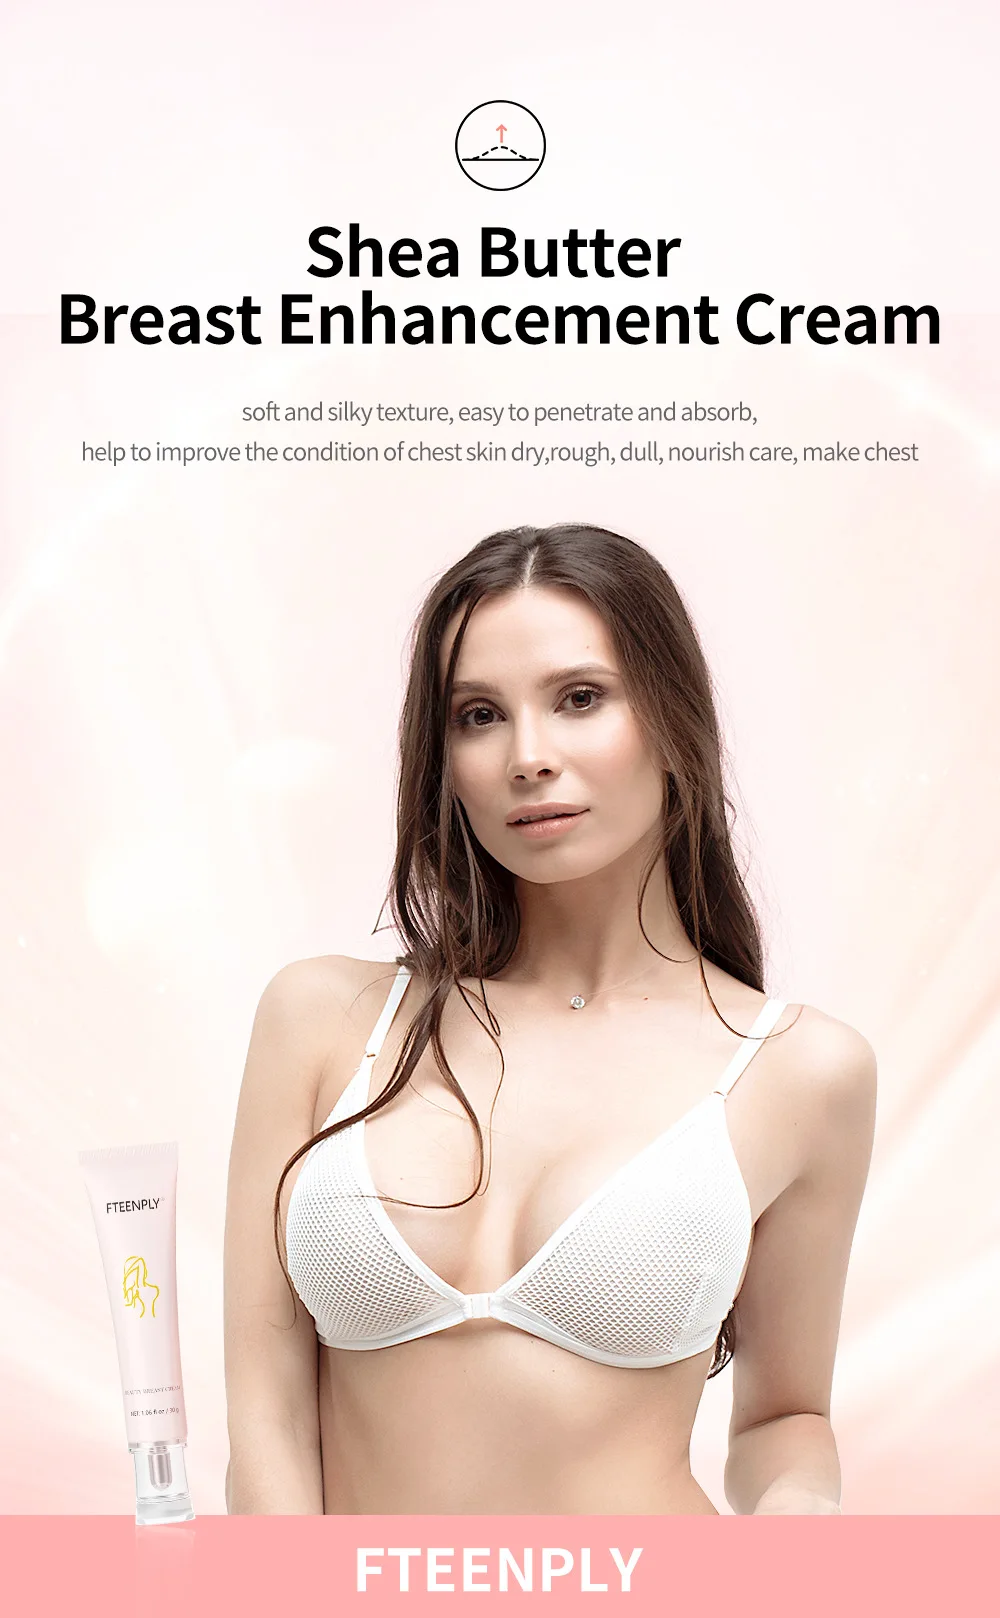 FTEENPLY Breast Enlargement Cream Beauty Chest